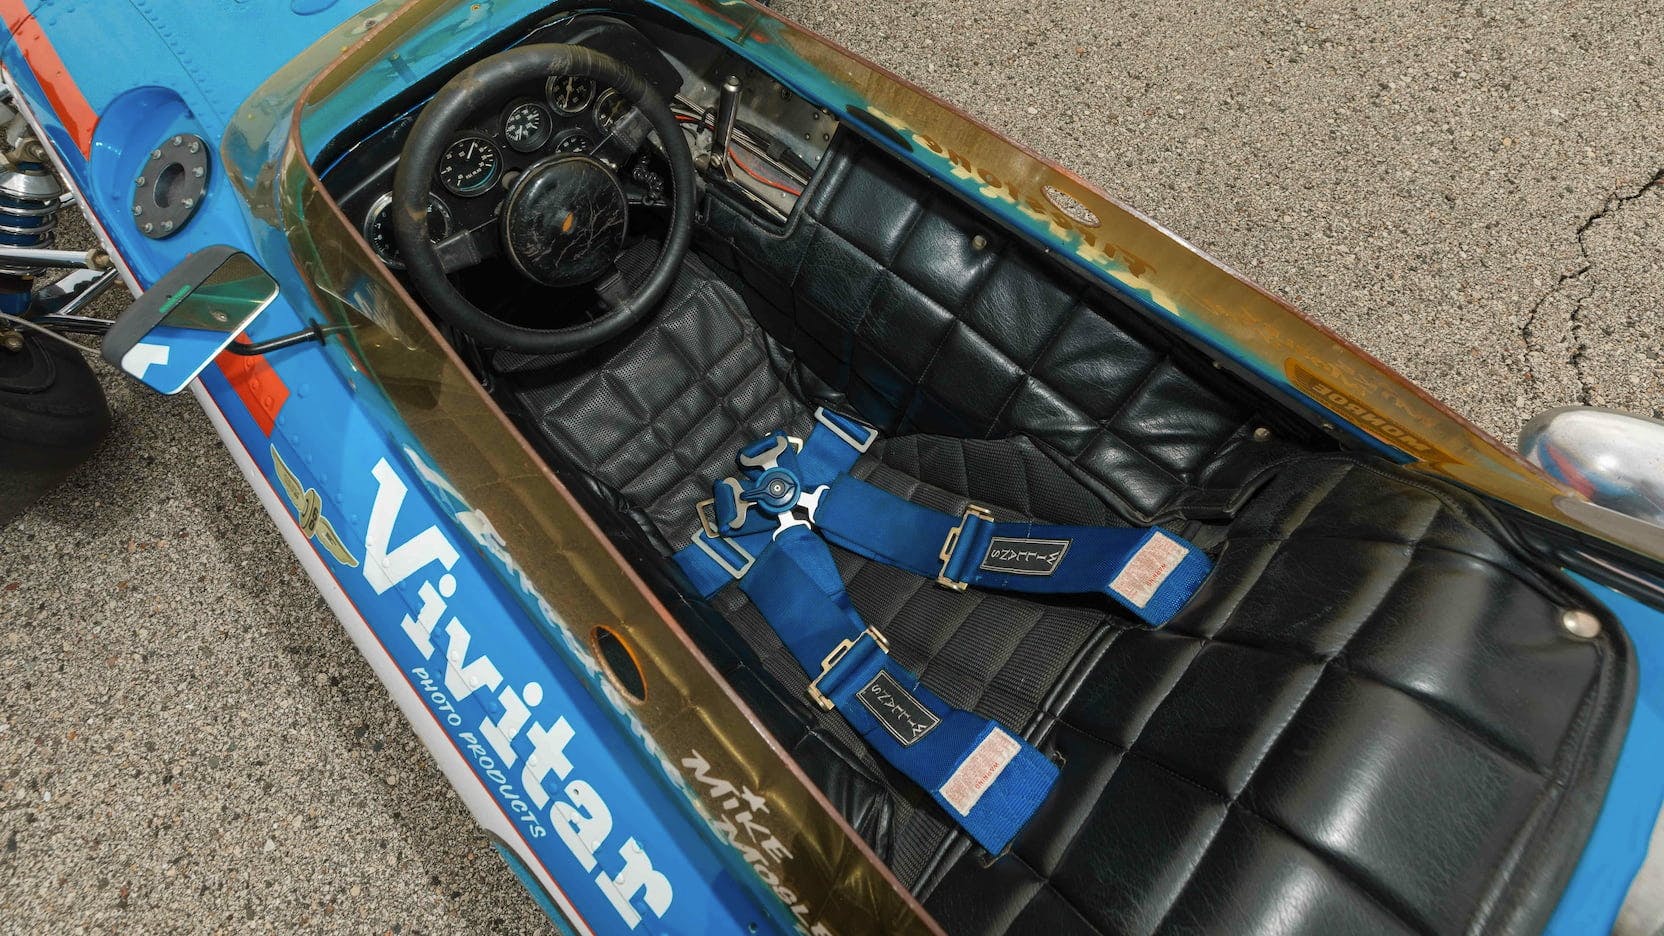 1968 Eagle Offenhauser Indy Car interior seat